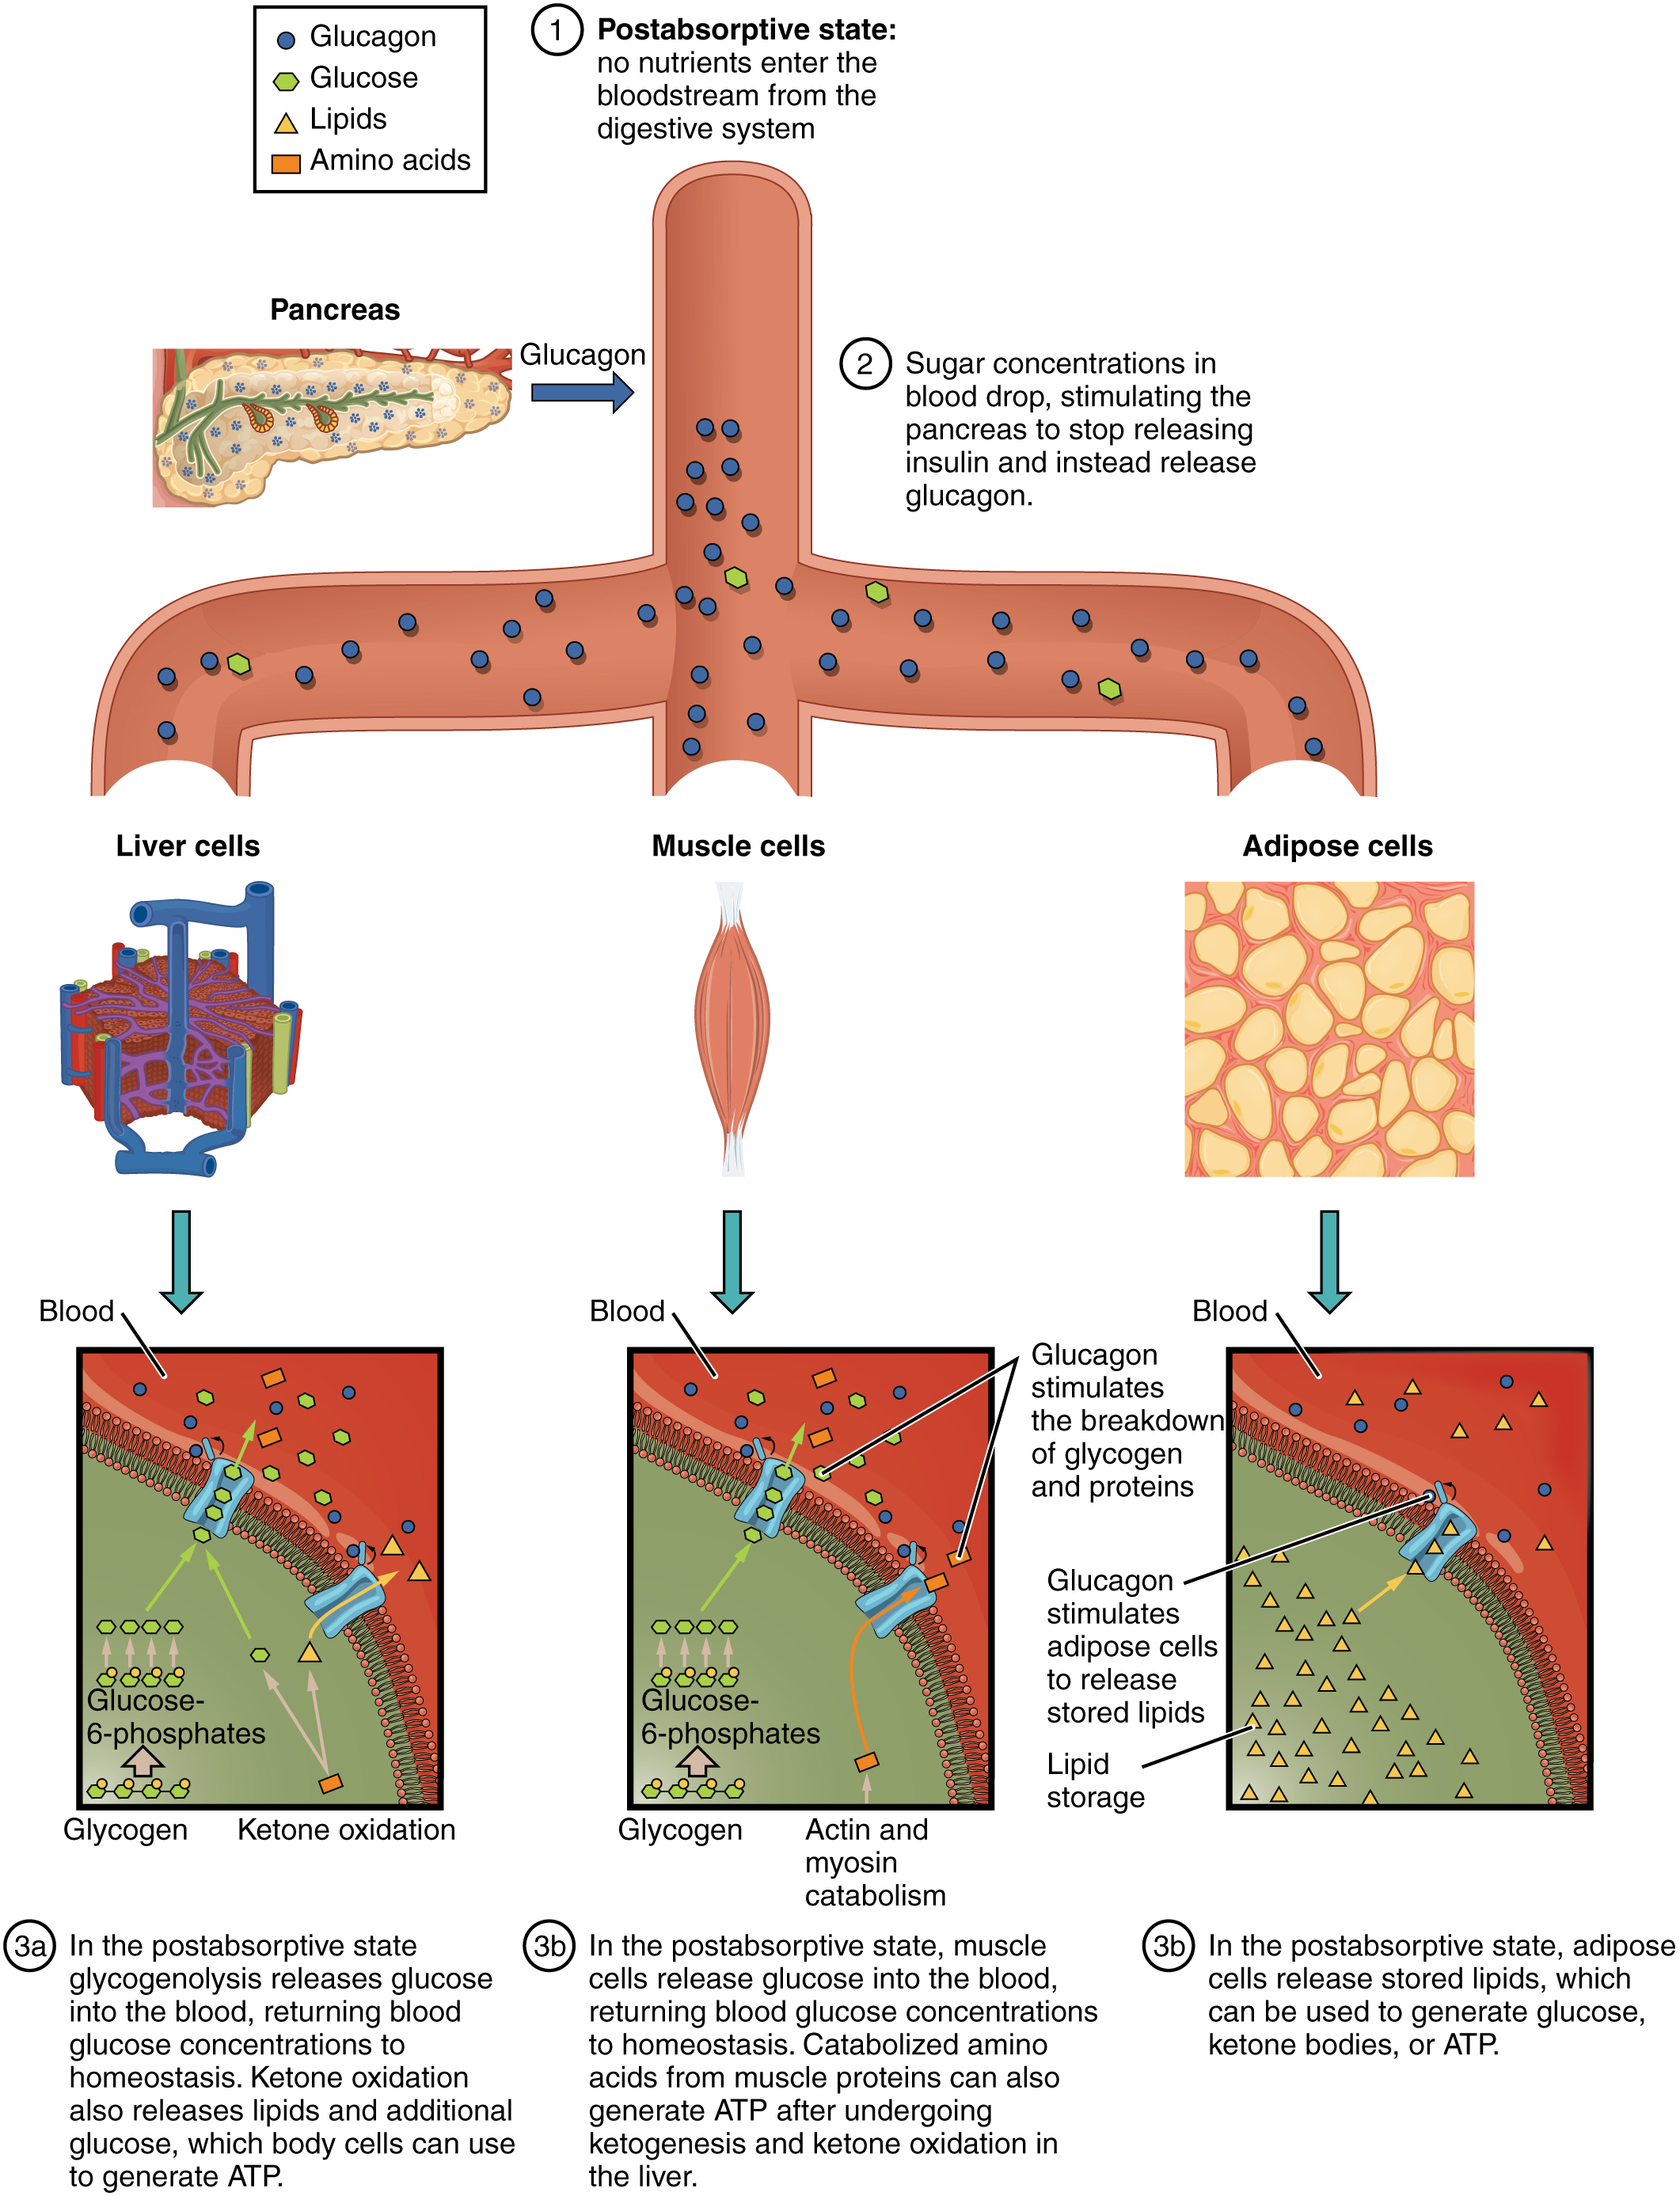 This figure shows the postabsorptive stage where no nutrients enter the blood stream from the digestive system and its effects of liver cells, muscle cells, and adipose cells.